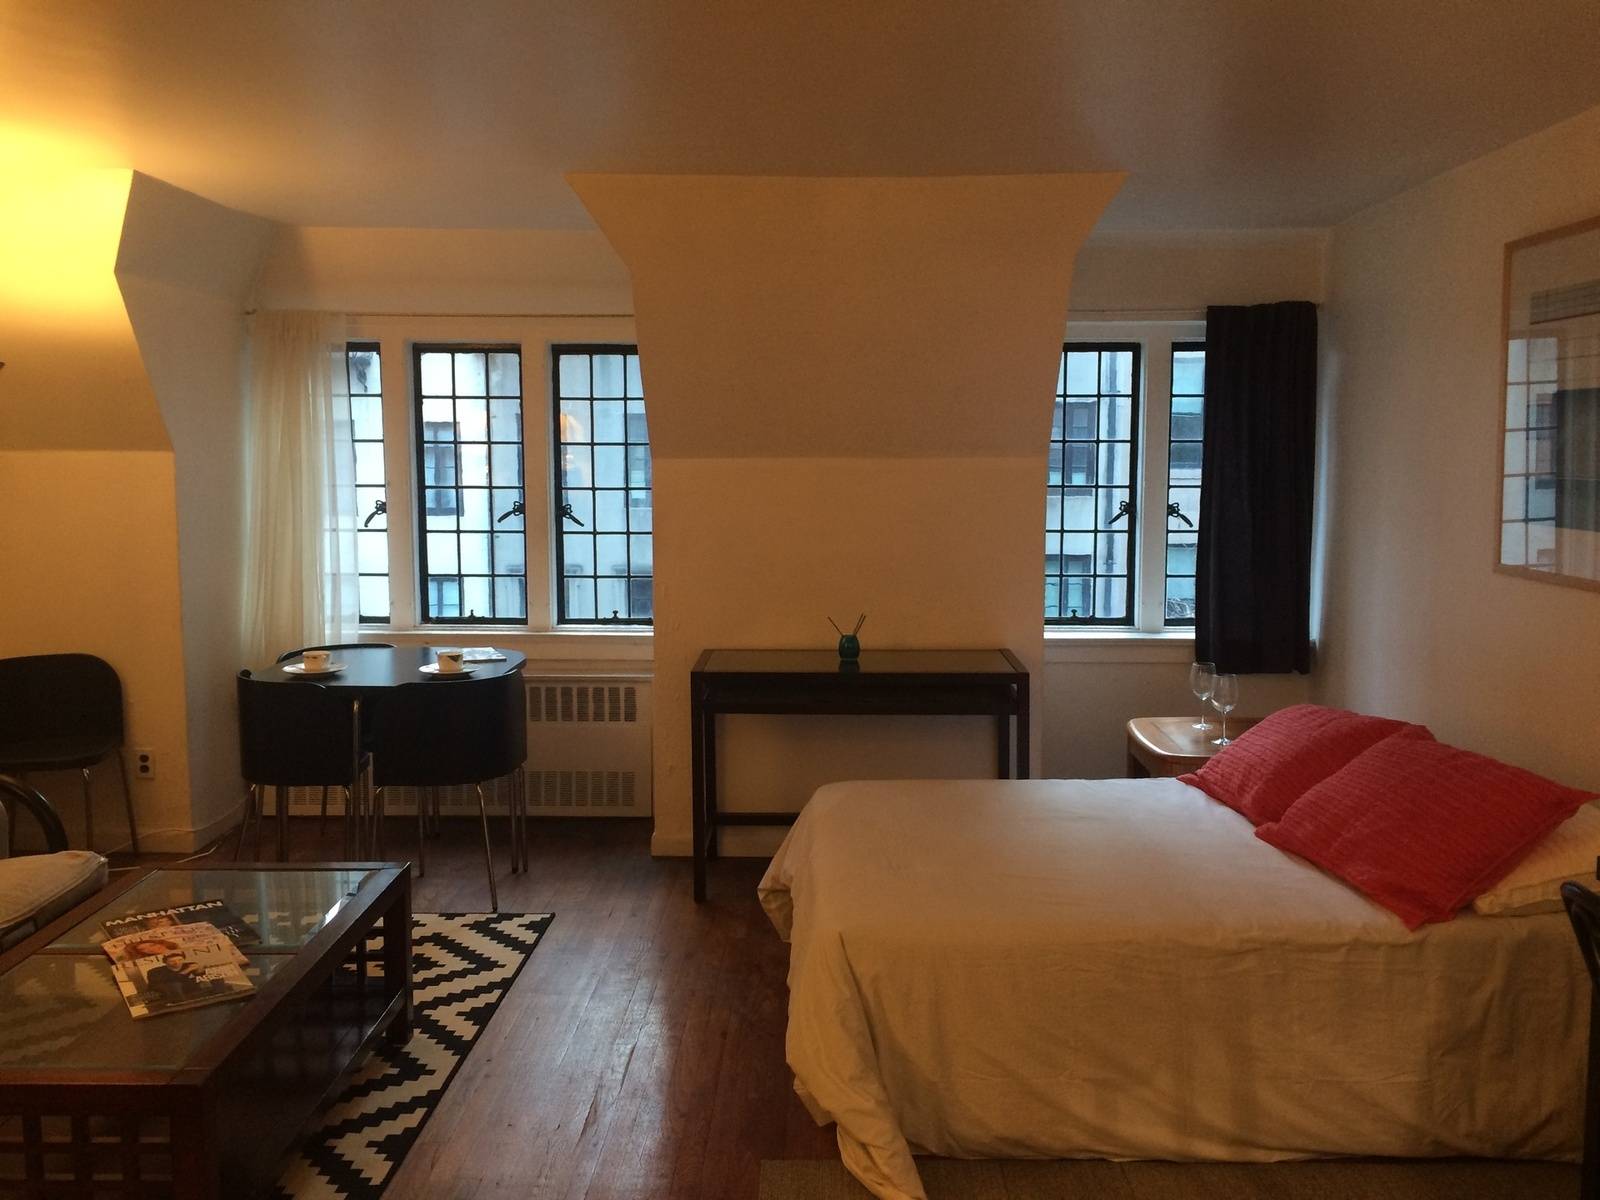 Fully Furnished! Available Short Or Long Term, Quintessential Midtown Studio